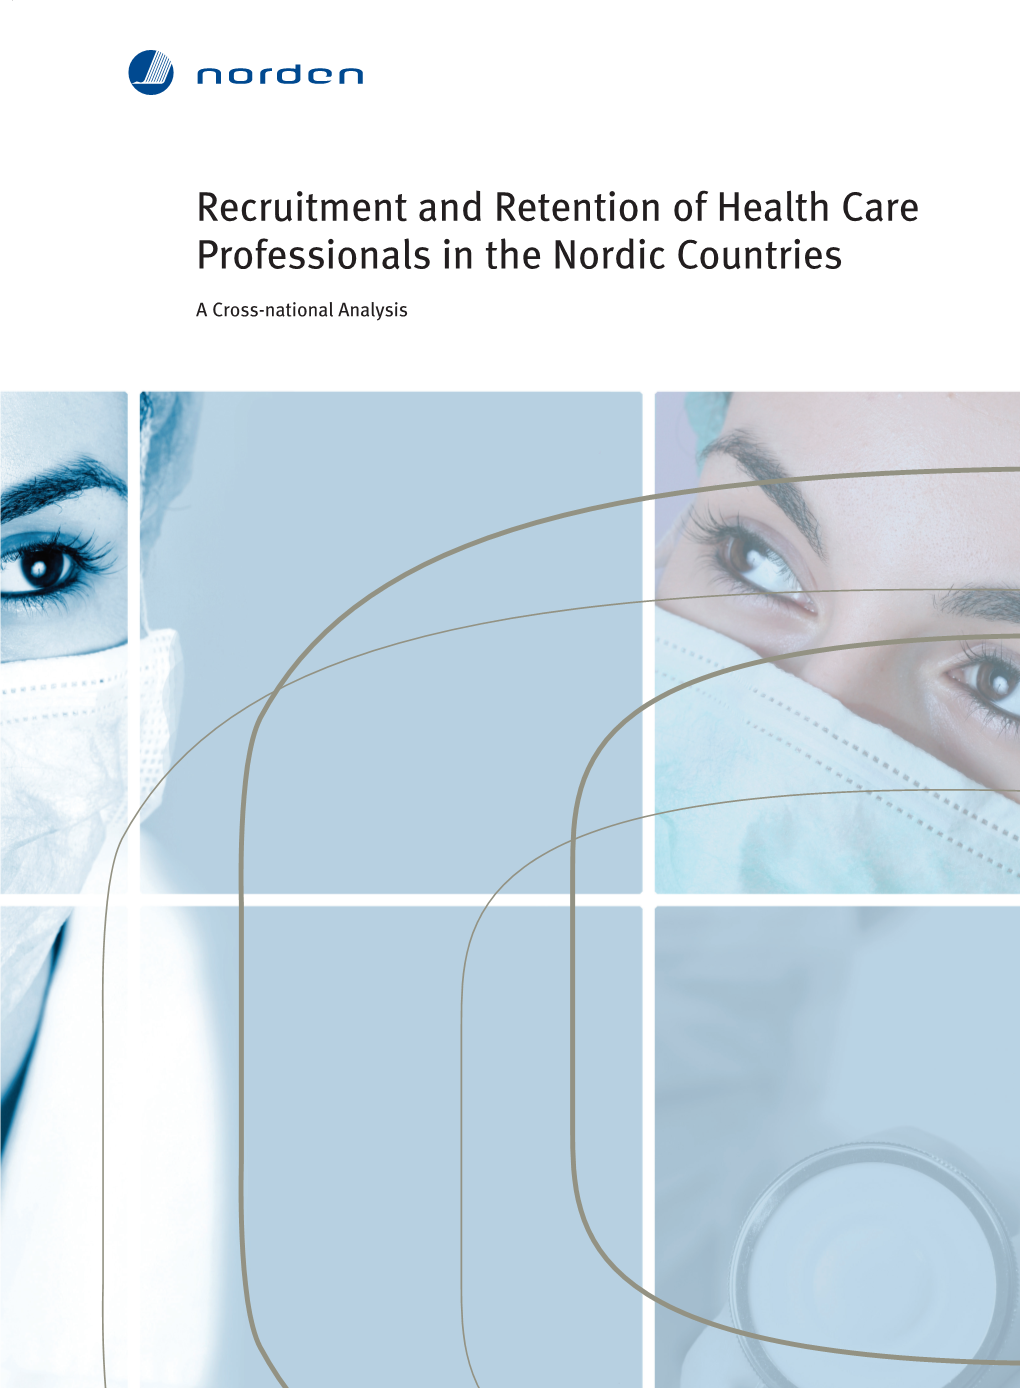 Recruitment and Retention of Health Care Professionals in the Nordic Countries